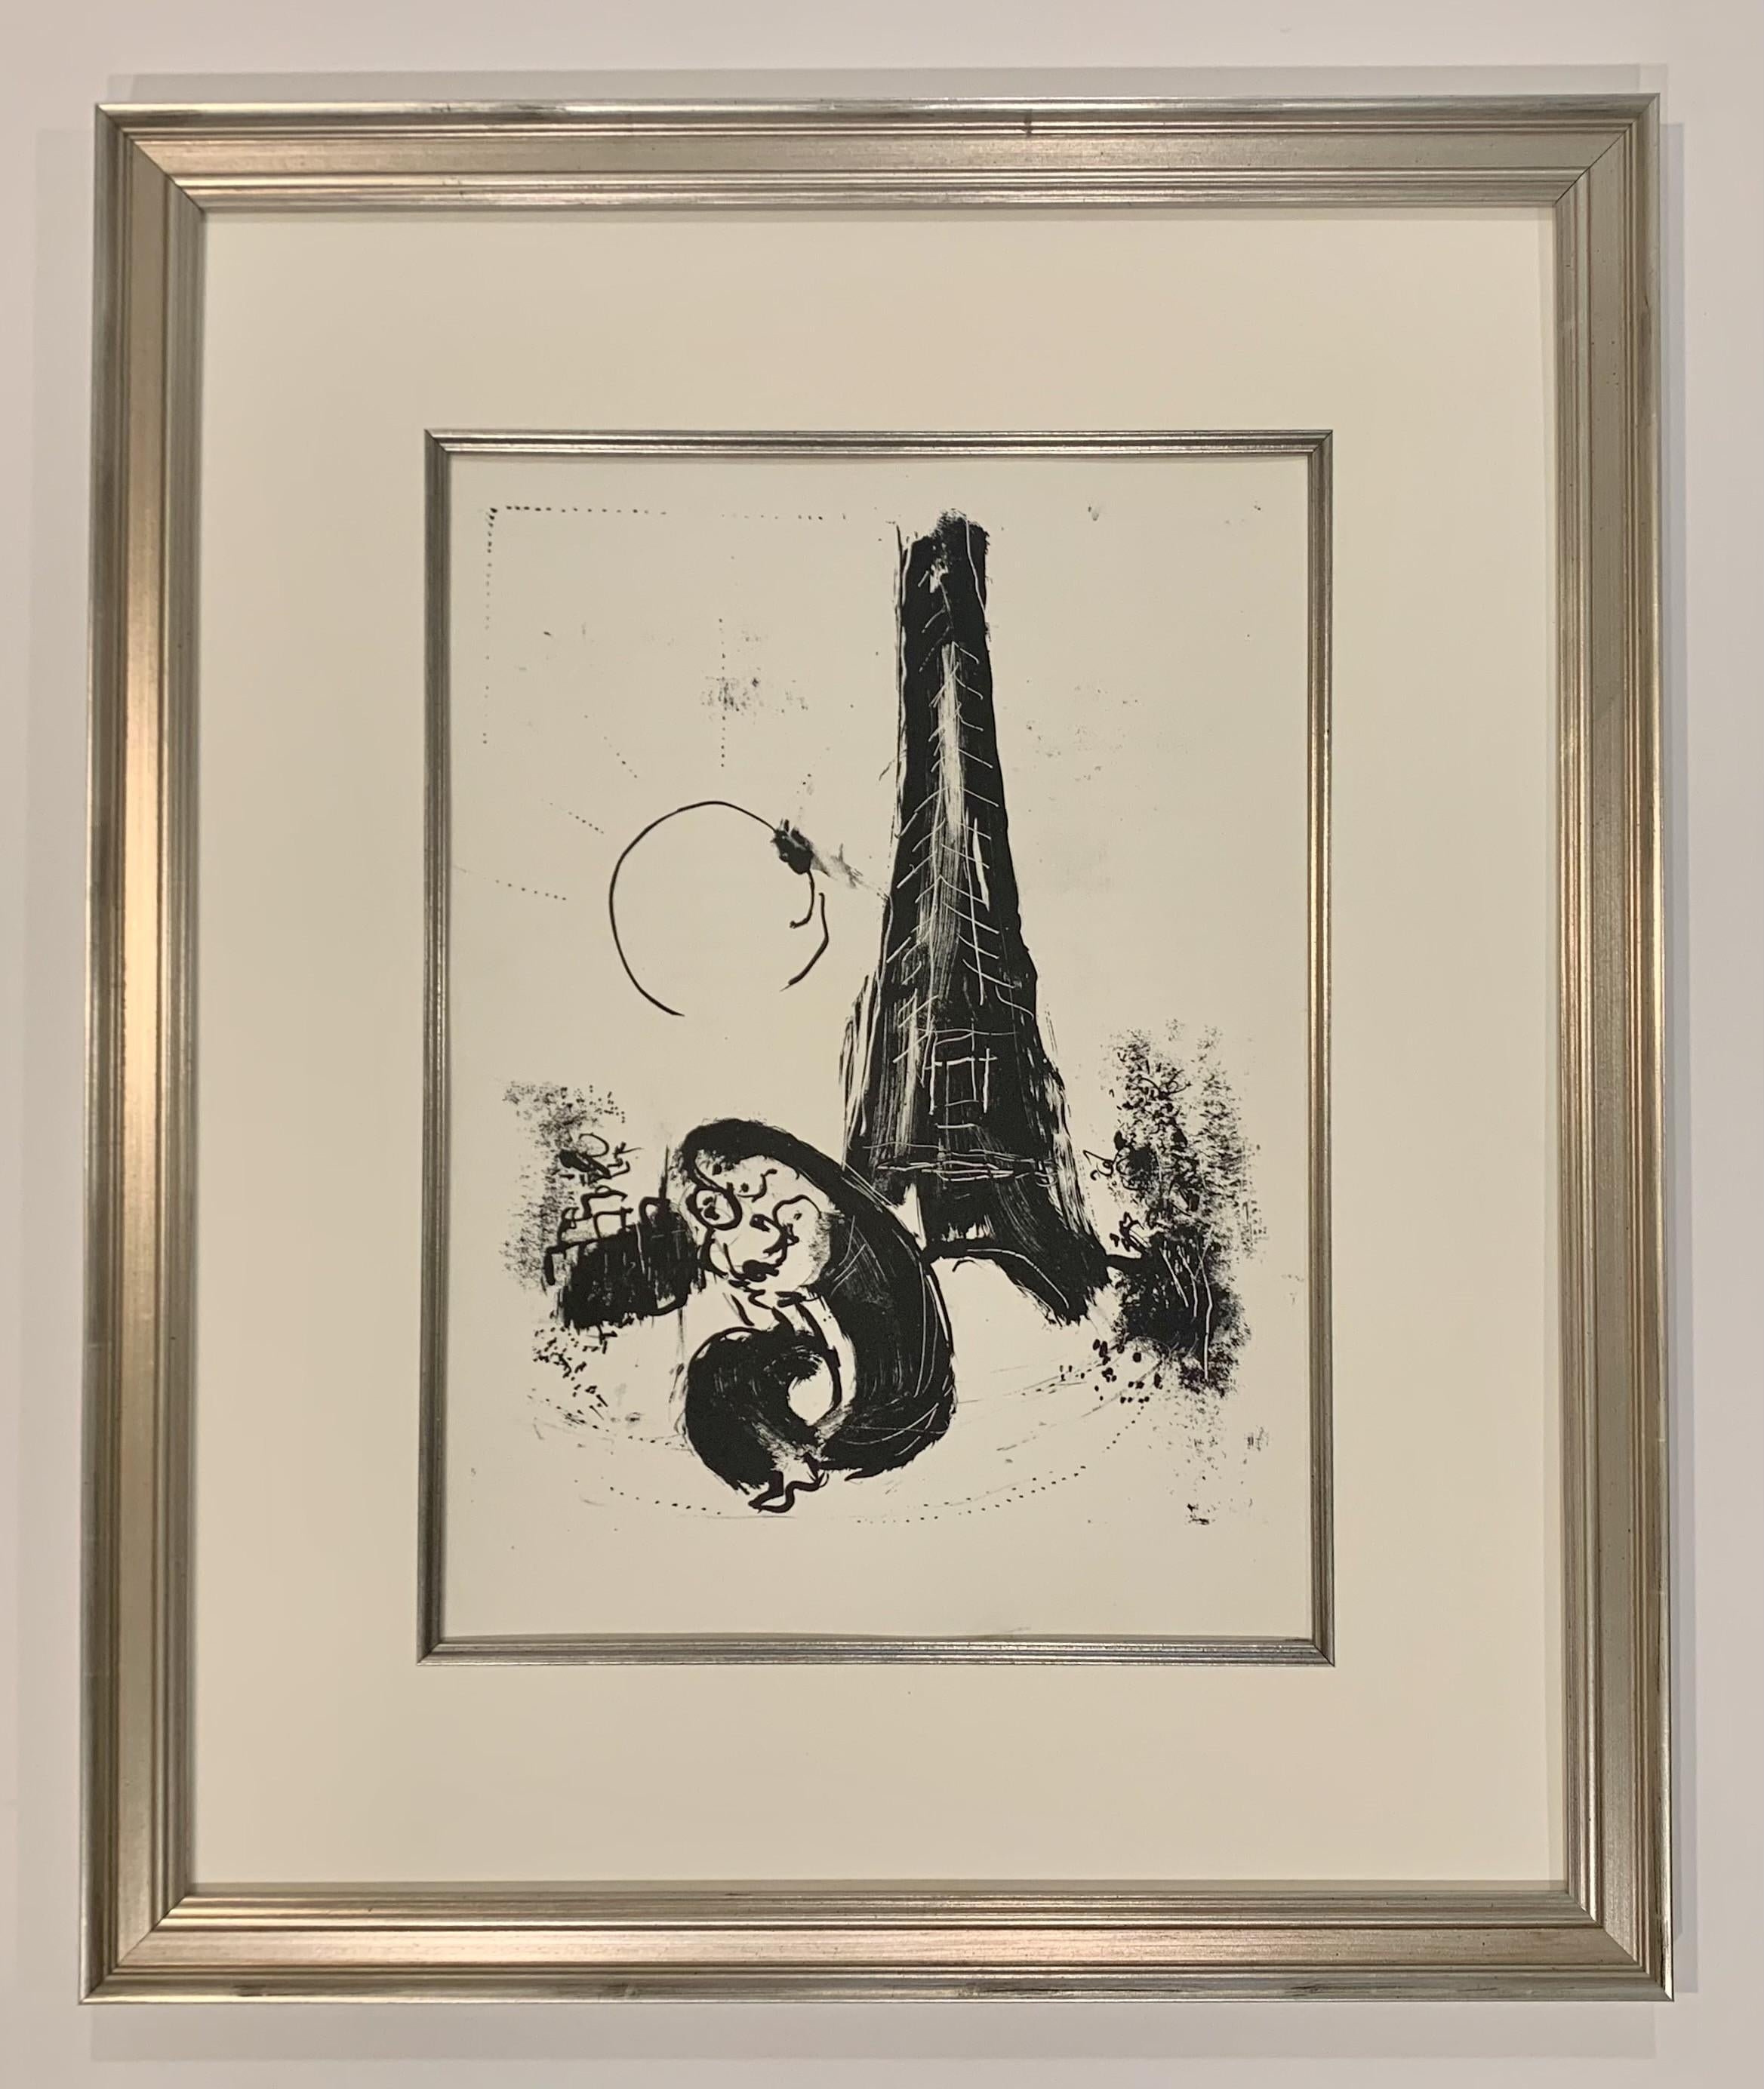 Mother and Child at Eiffel Tower - Print by Marc Chagall